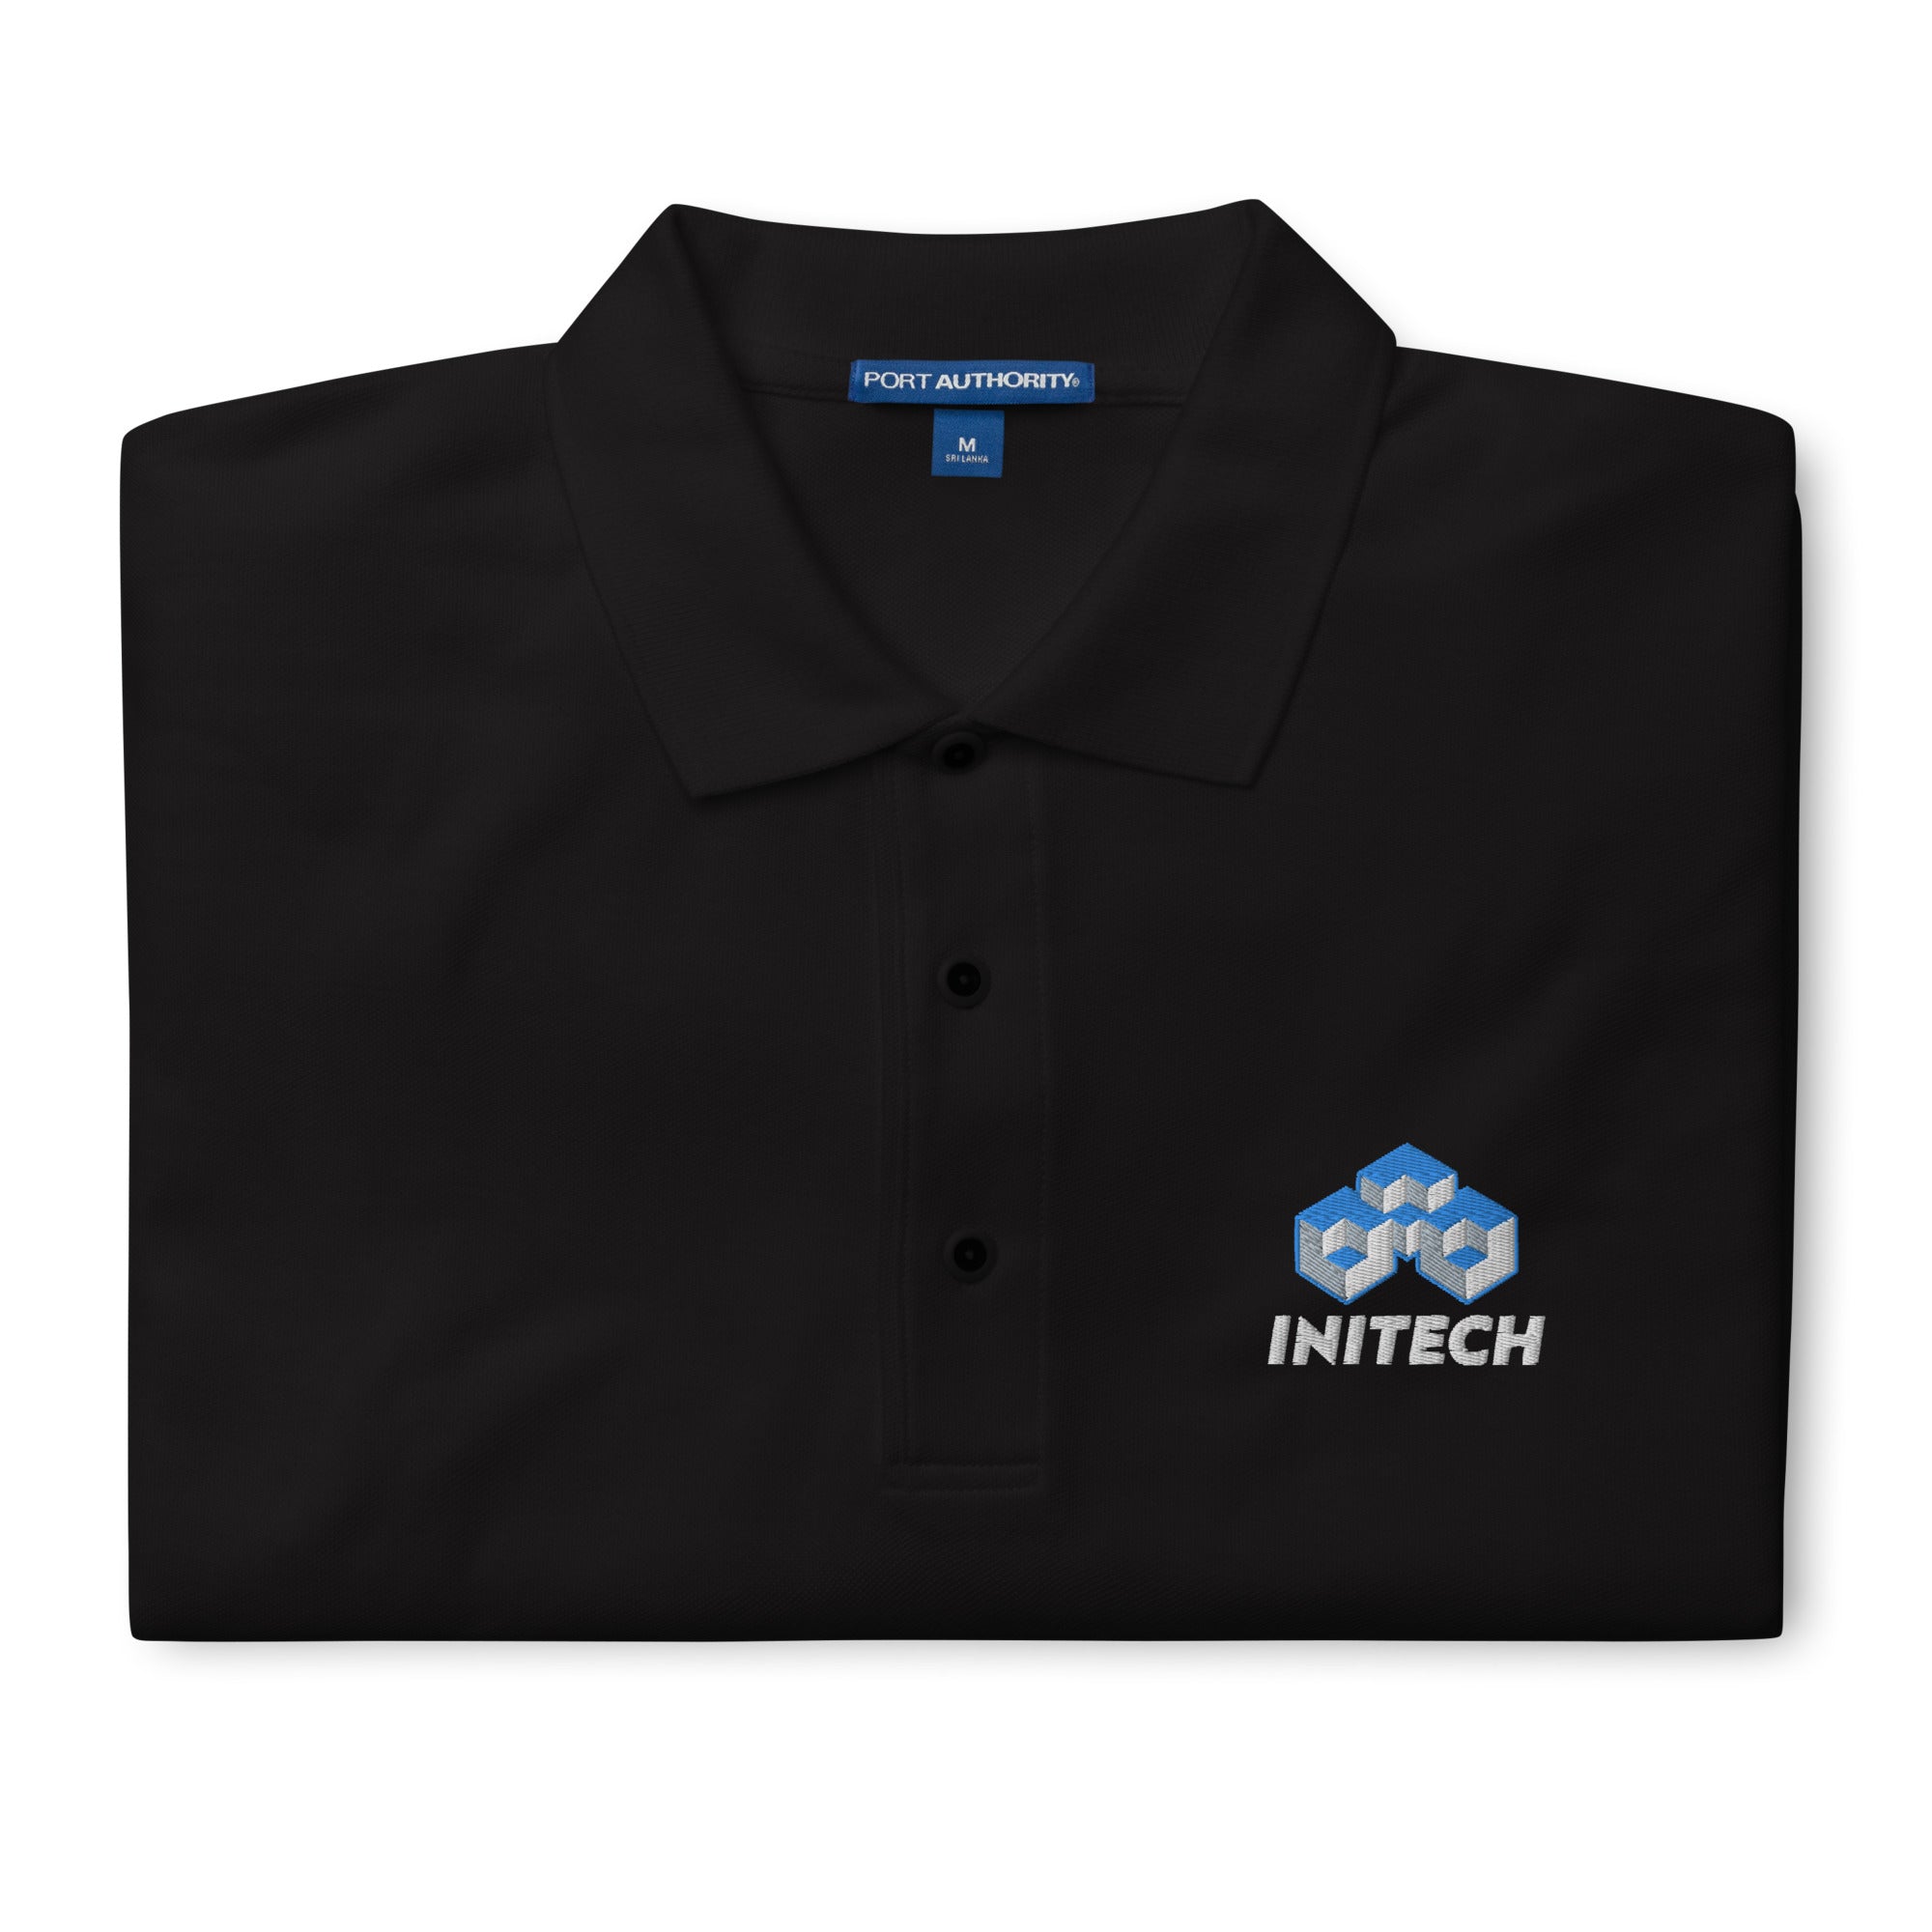 Initech Office Space Men's Embroidered Polo